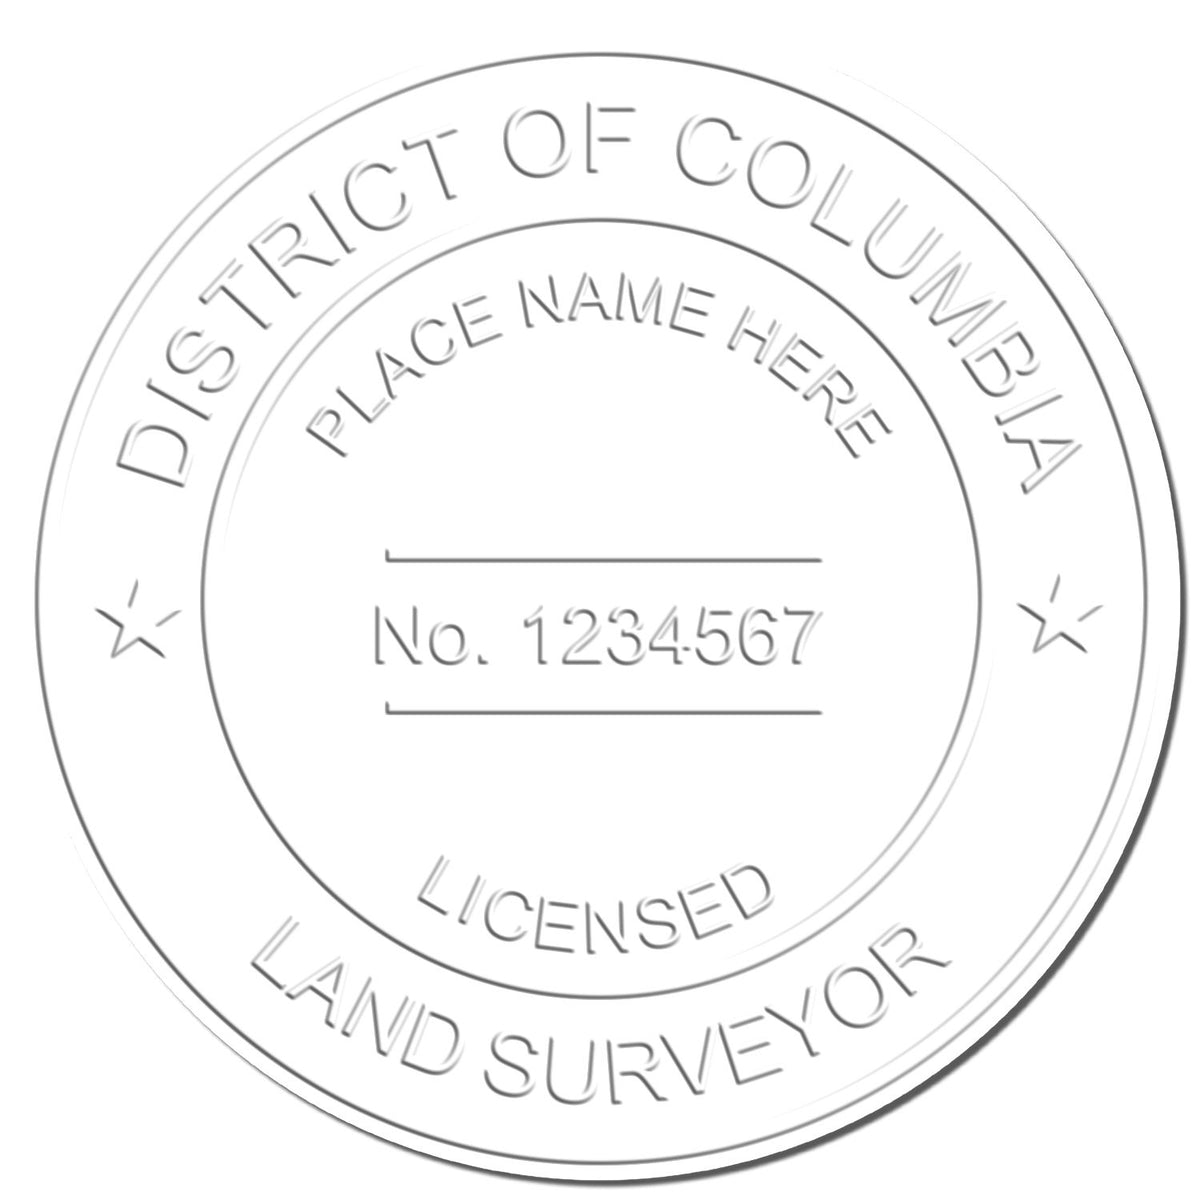 This paper is stamped with a sample imprint of the Heavy Duty Cast Iron District of Columbia Land Surveyor Seal Embosser, signifying its quality and reliability.